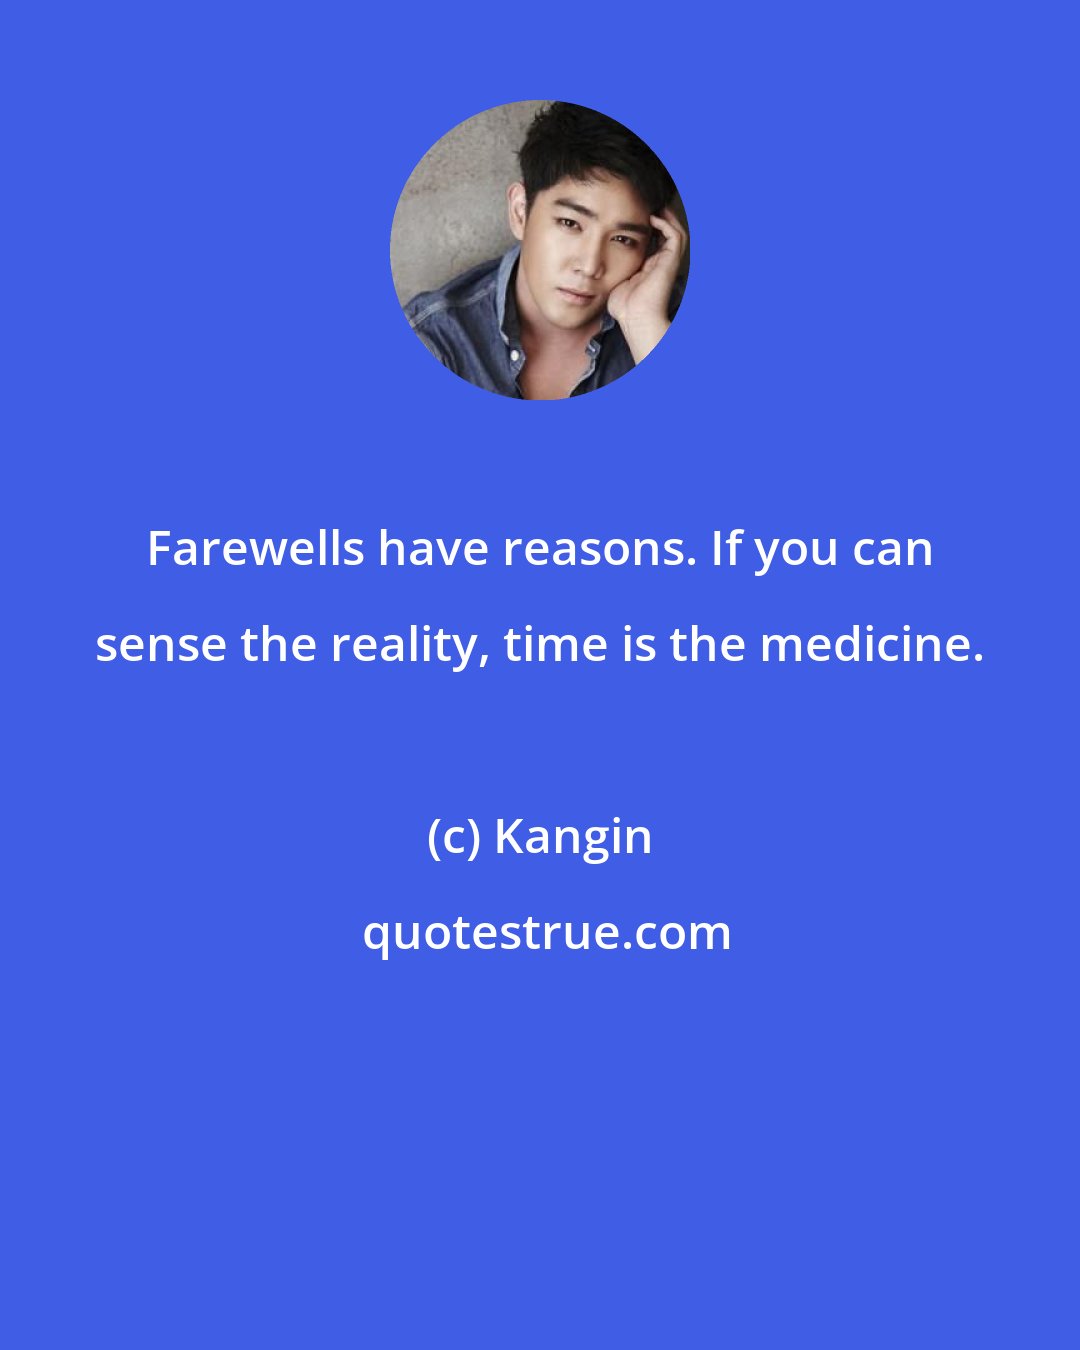 Kangin: Farewells have reasons. If you can sense the reality, time is the medicine.